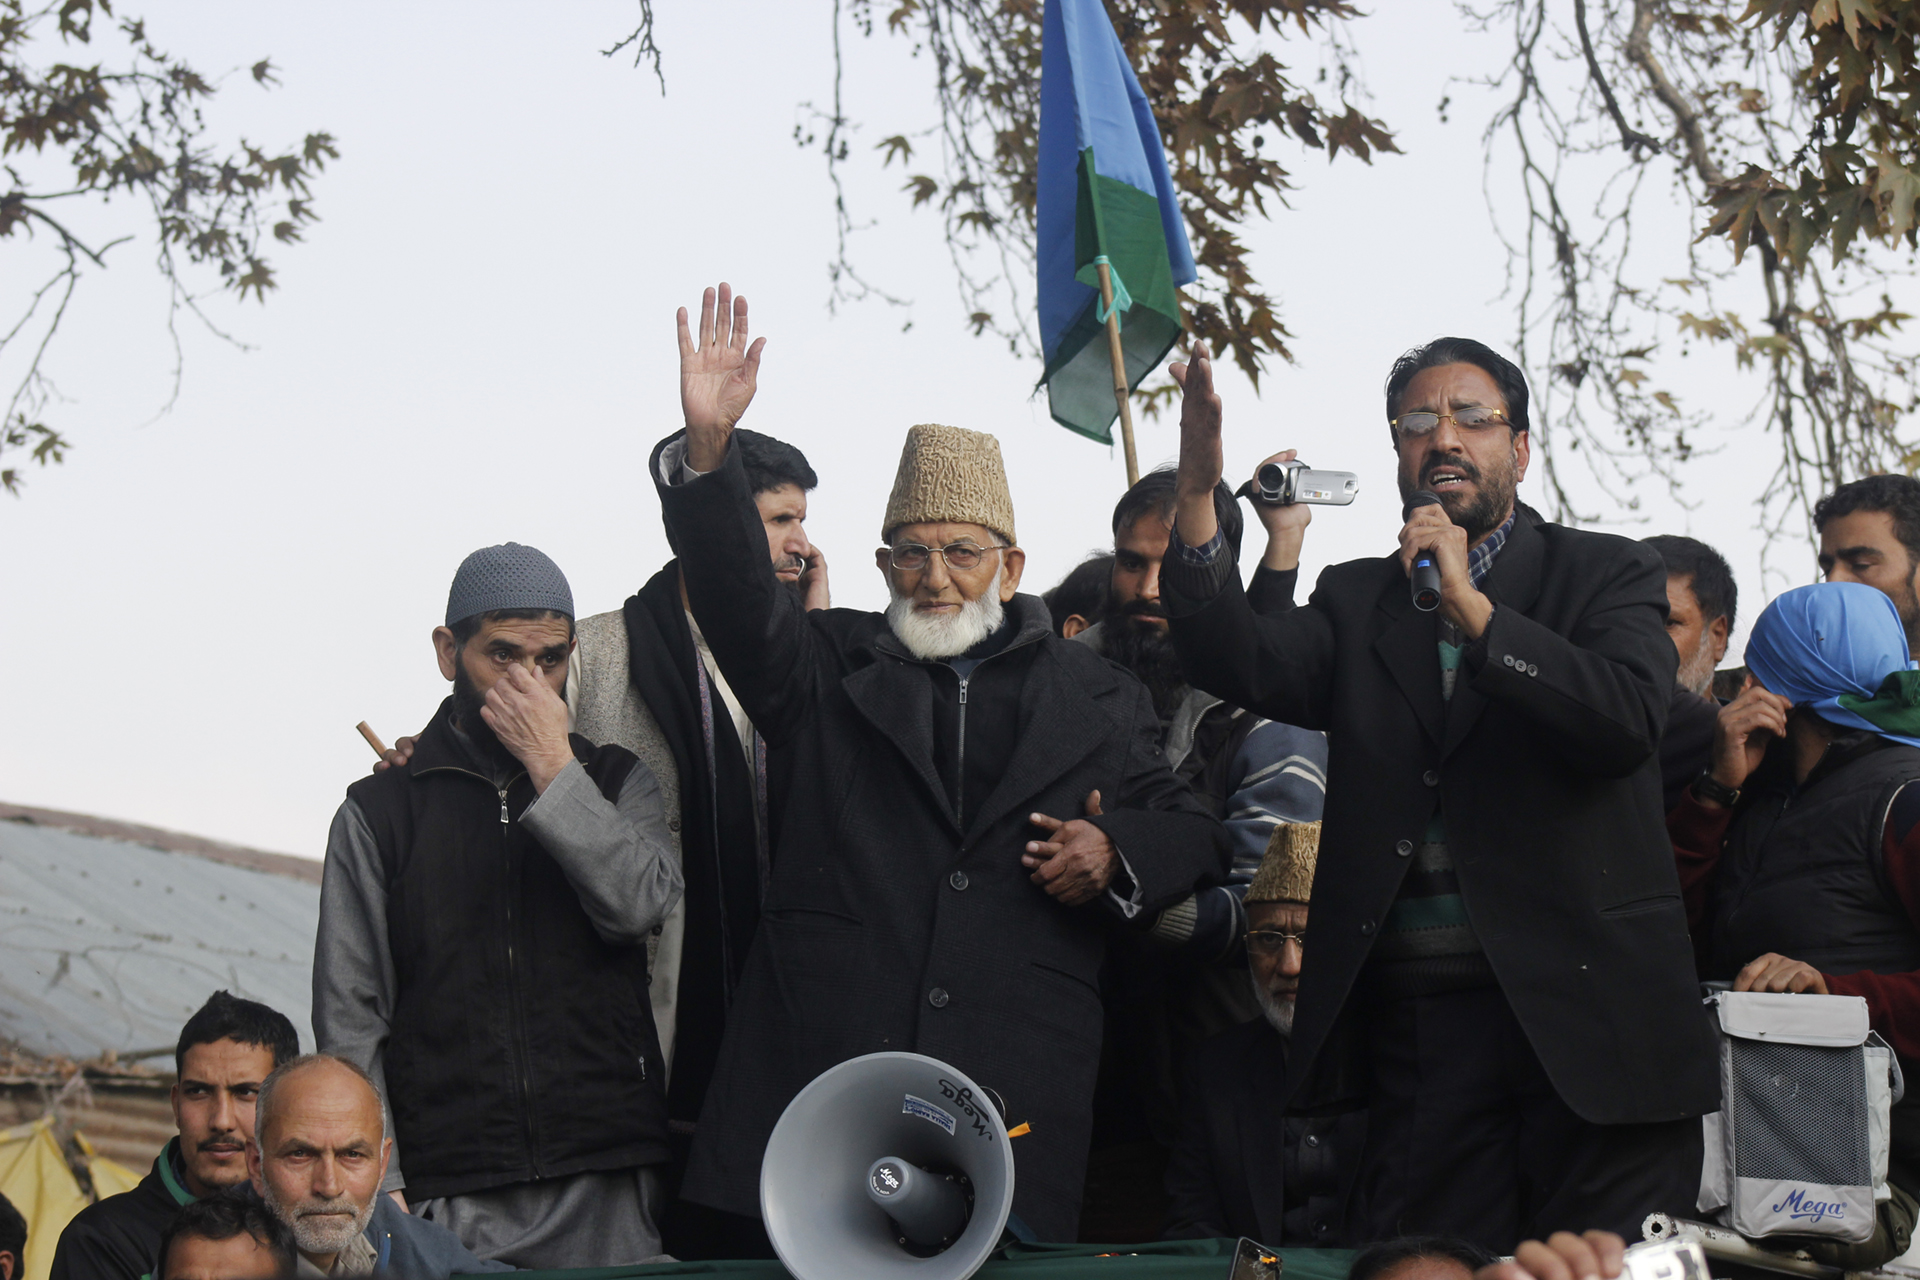 The night that Kashmir’s Syed Ali Shah Geelani died